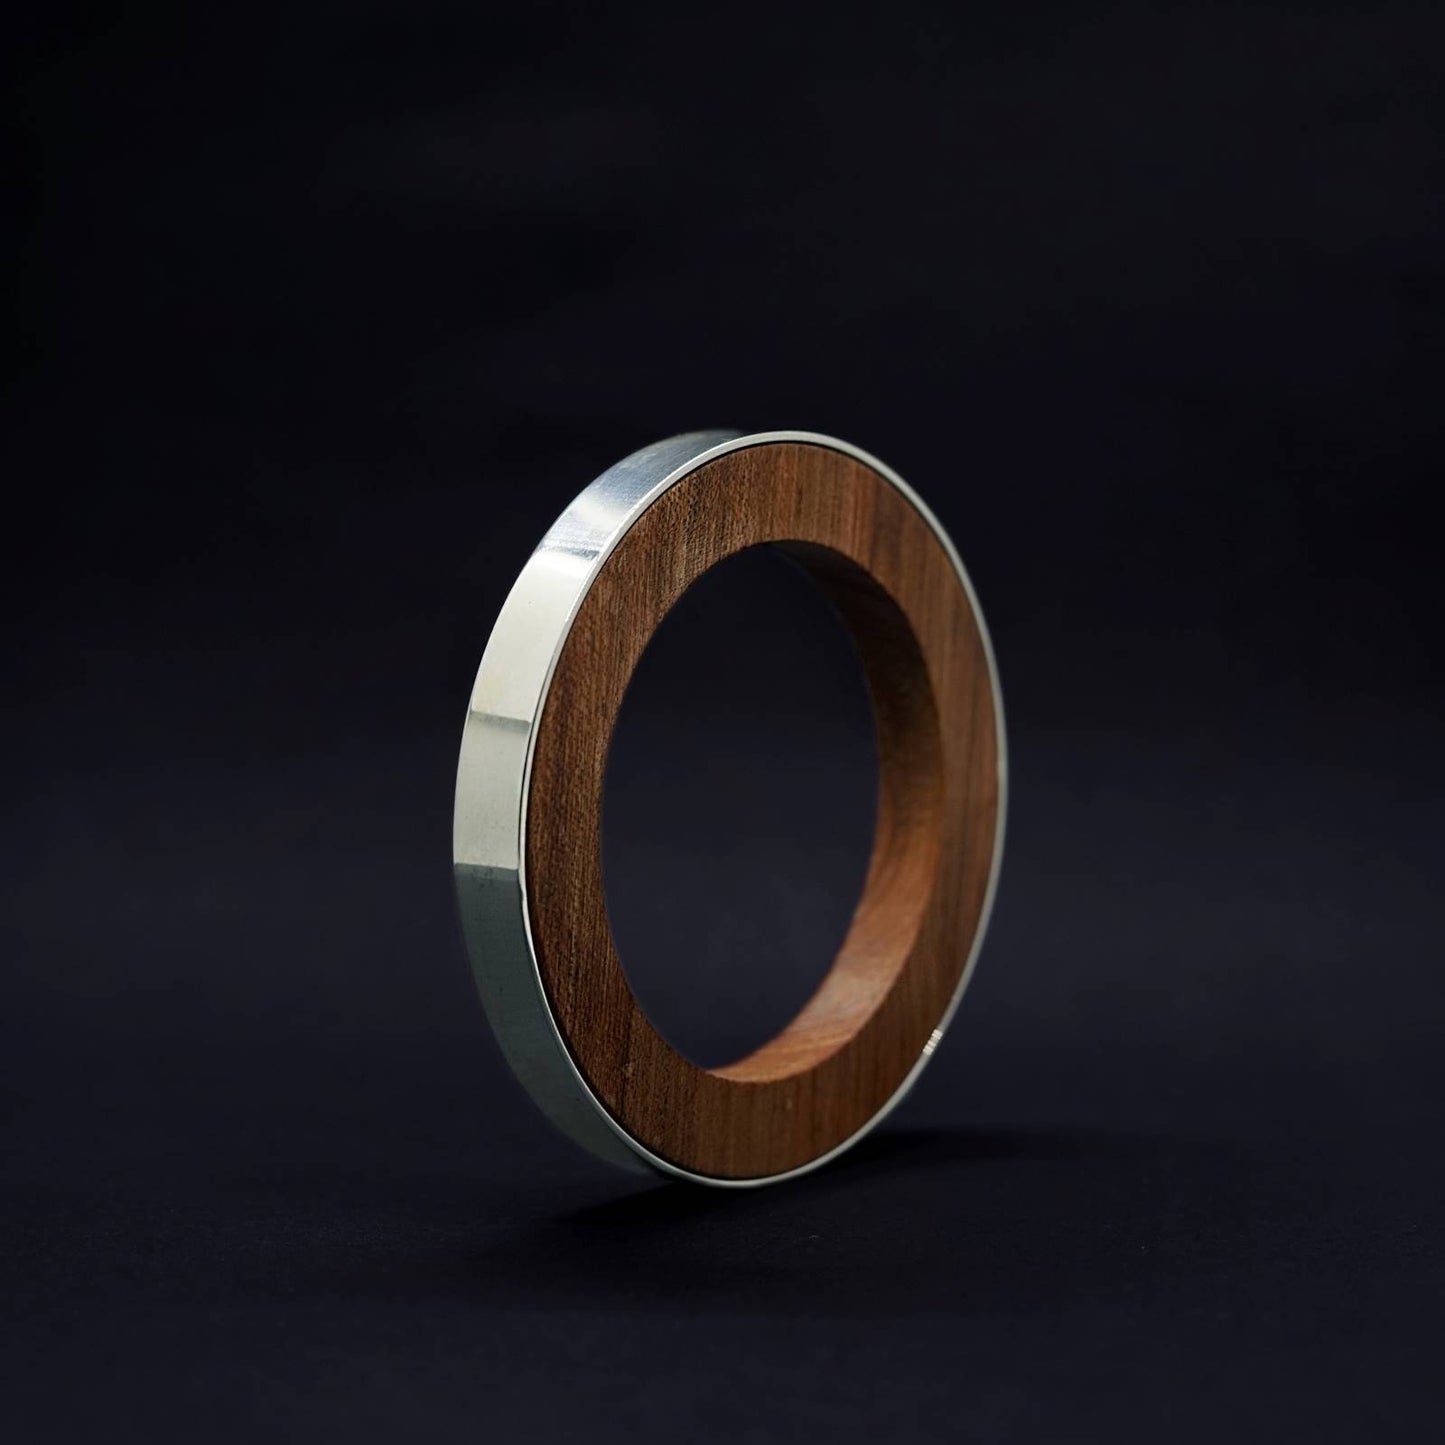 Iris Circle Bangle by Silverwood Jewellery with wood inner vegan polish and sterling silver bangle